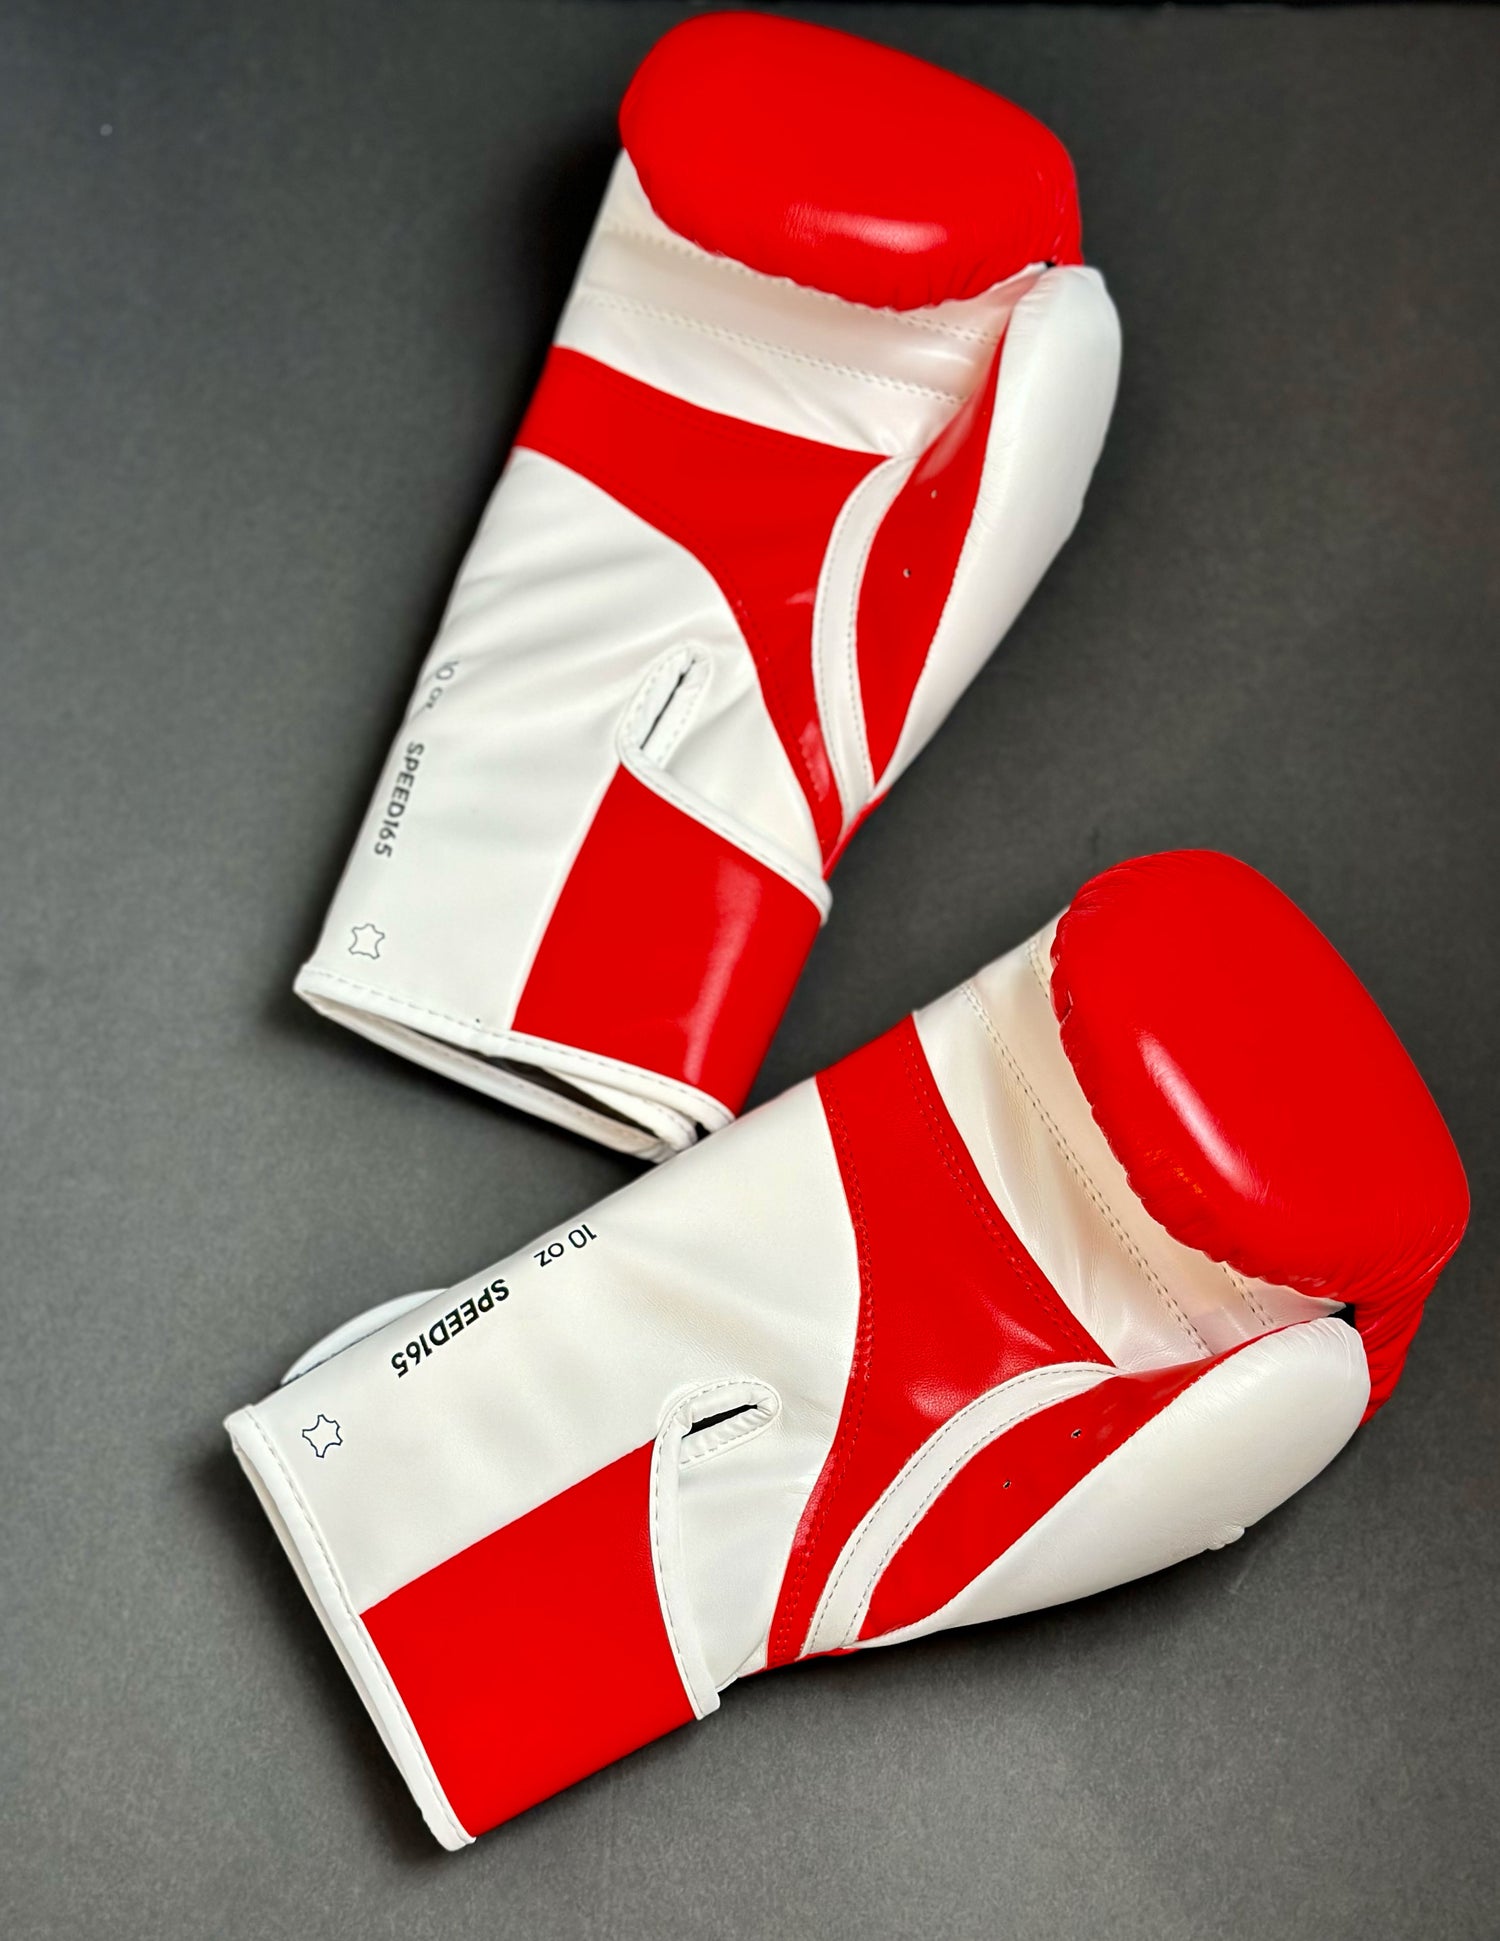 Adidas WAKO Approved Kickboxing Fight Gloves, Cowhide Cuir Leather Speed 165 adiSBG165 Competition Gloves 10 Oz Red, black background 